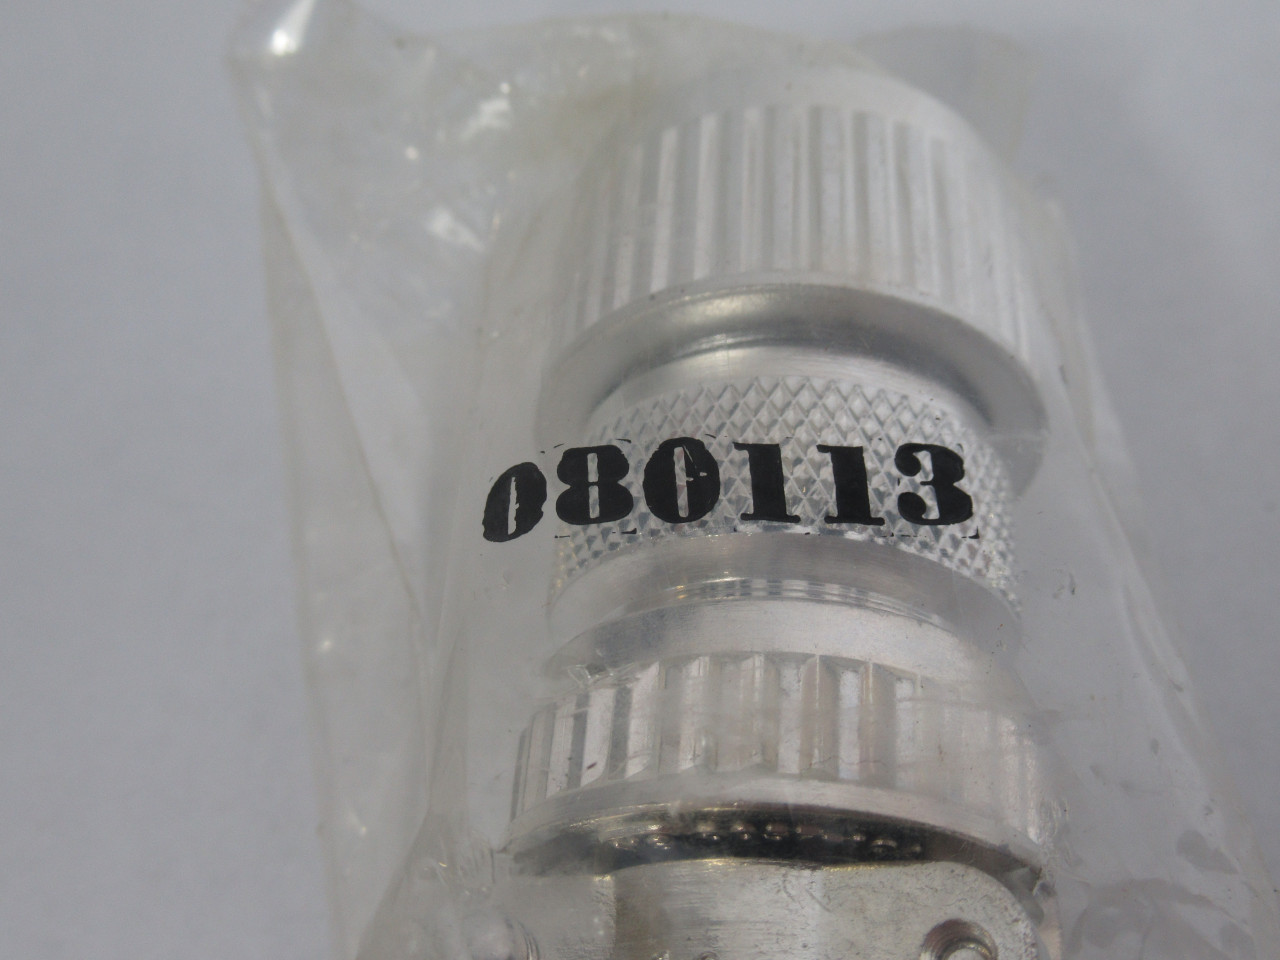 Encoder 080113 Size 20/25 Series Female Mating Connector 10-Pin ! NWB !